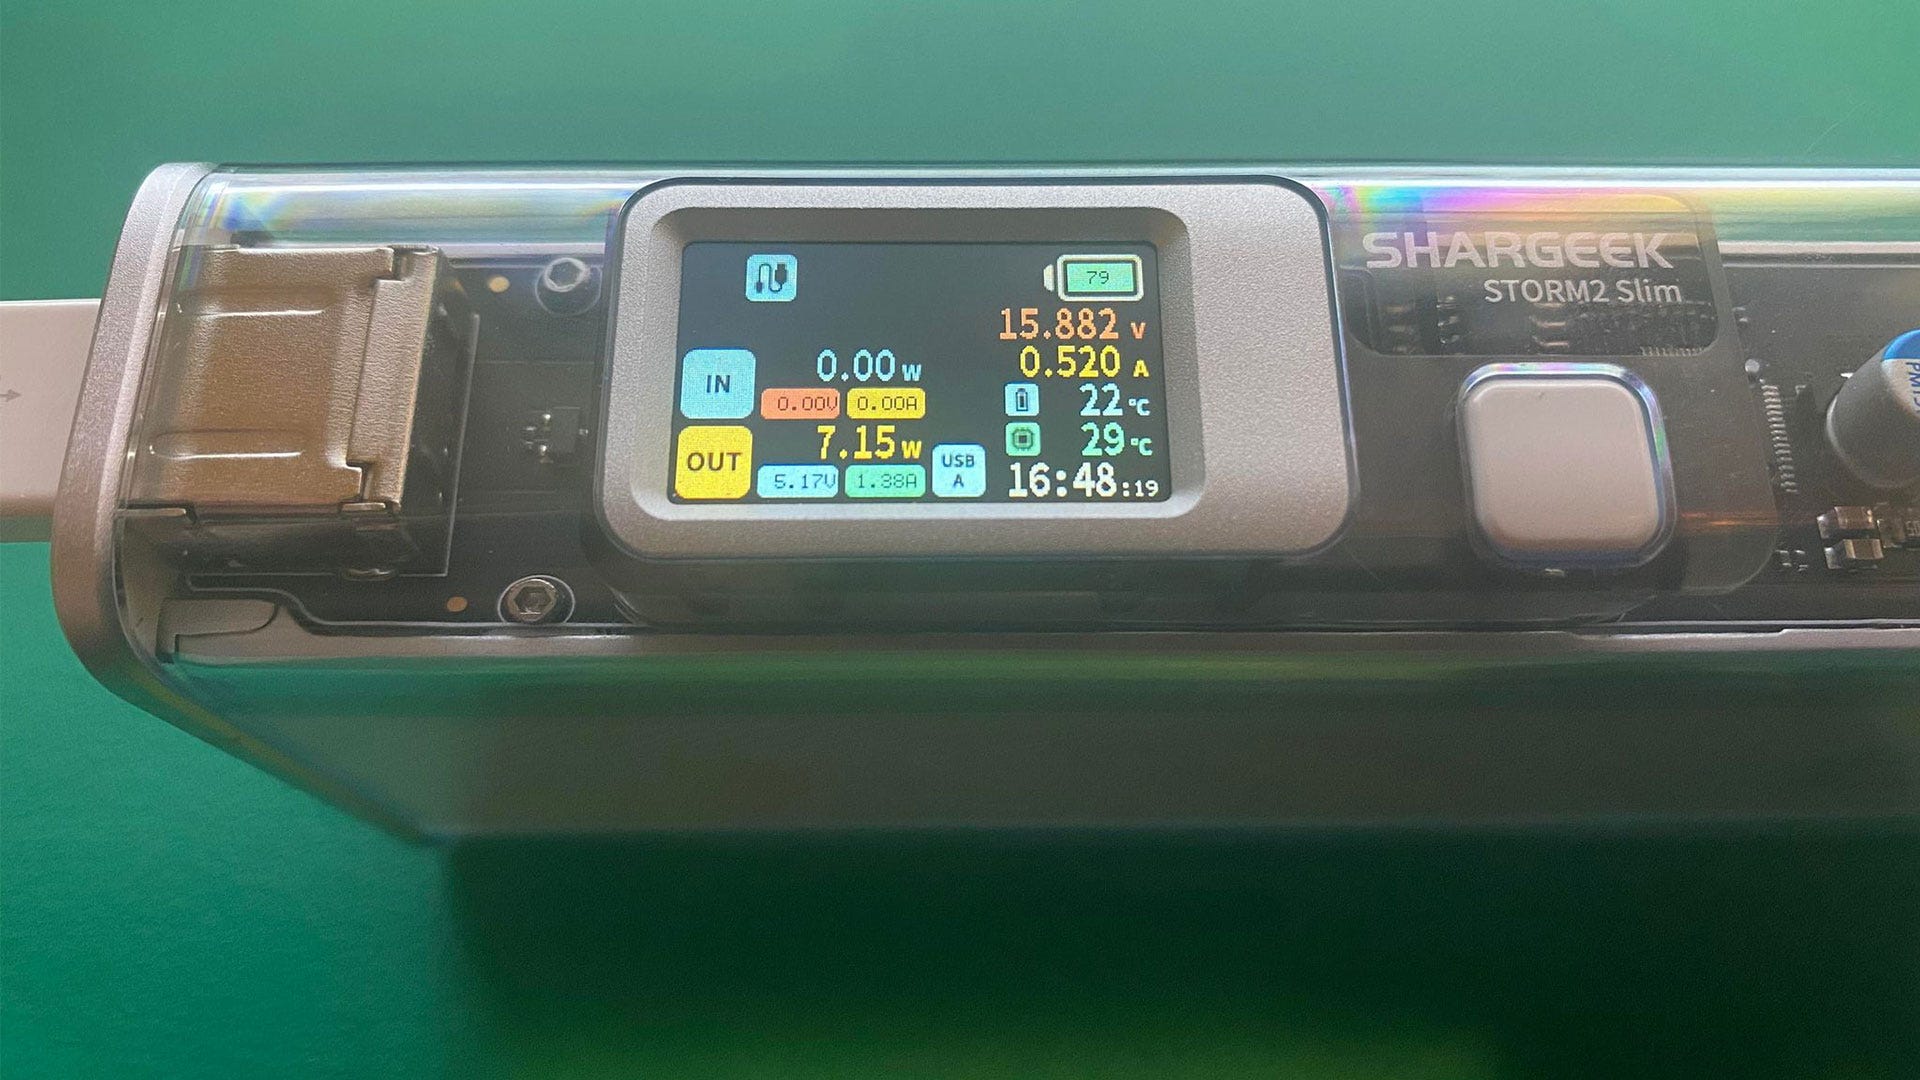 Shargeek Storm 2 Slim showing 7w output charging to iPhone